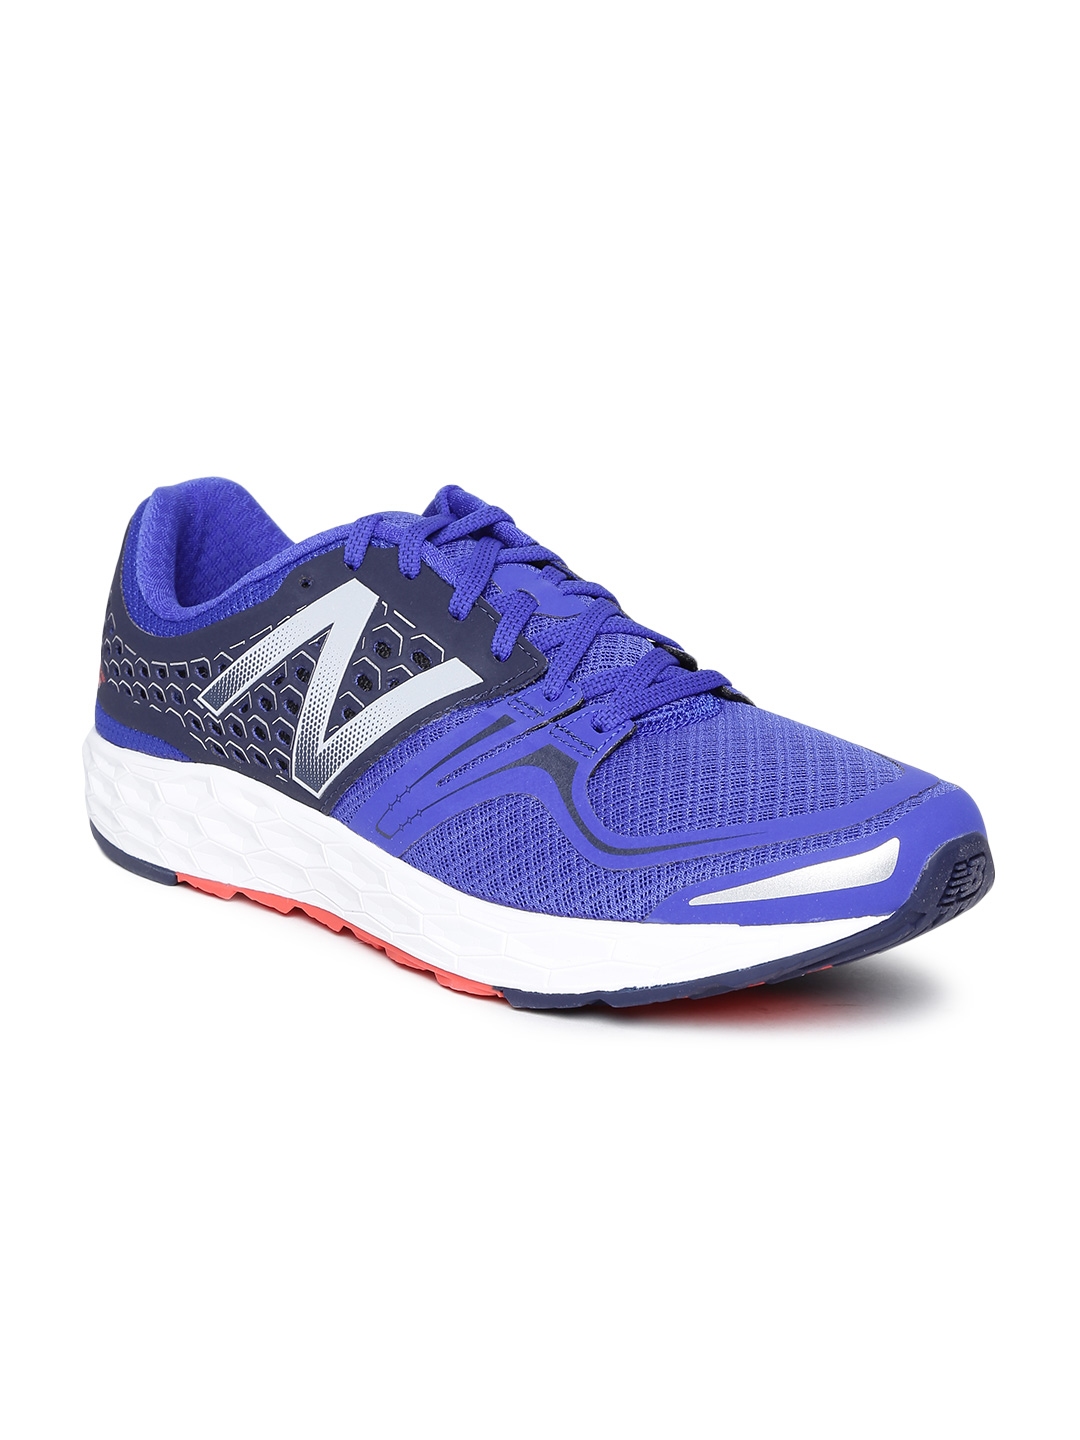 Buy New Balance Men Blue MVNGOBY Running Shoes - Sports Shoes for Men  1572831 | Myntra